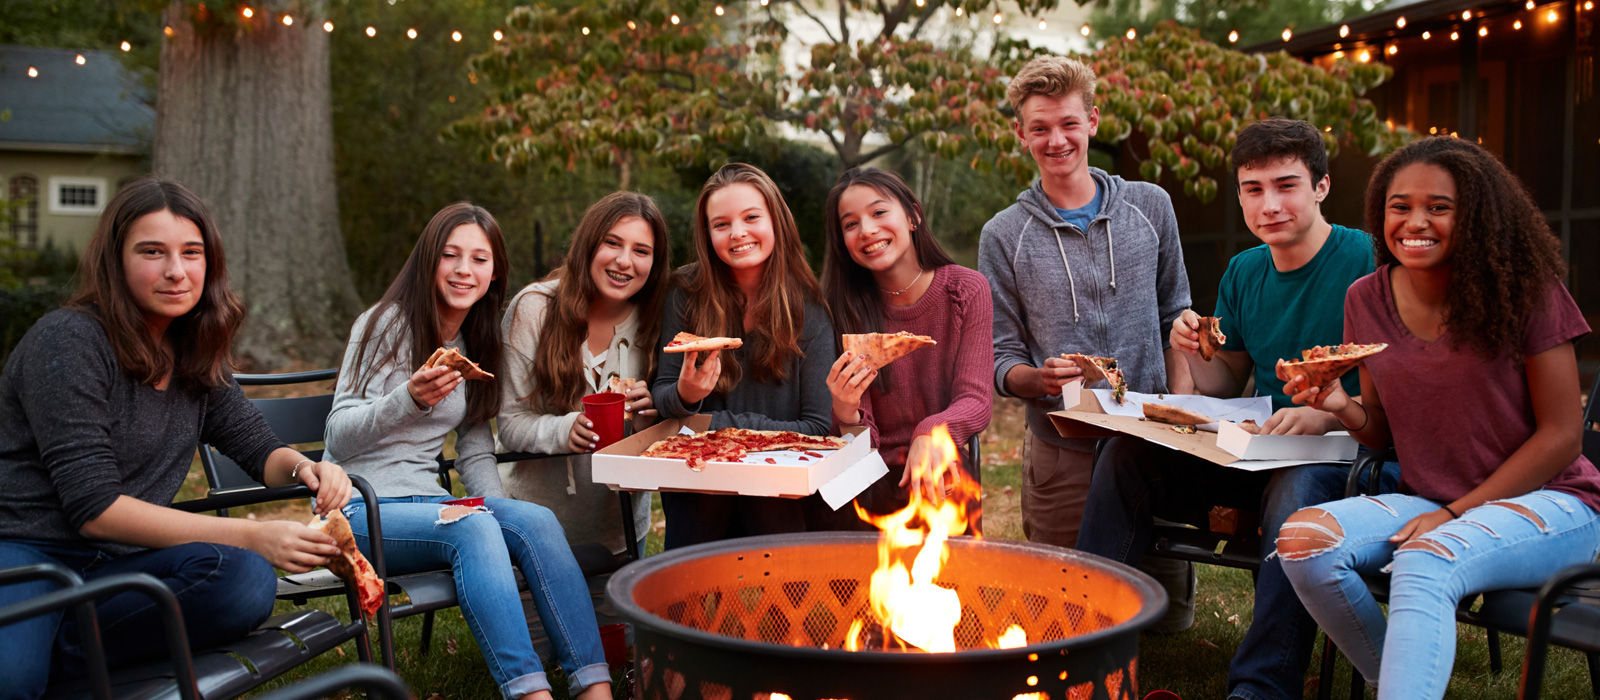 A group of high school aged students enjoying takeout pizza around a backyard bonfire